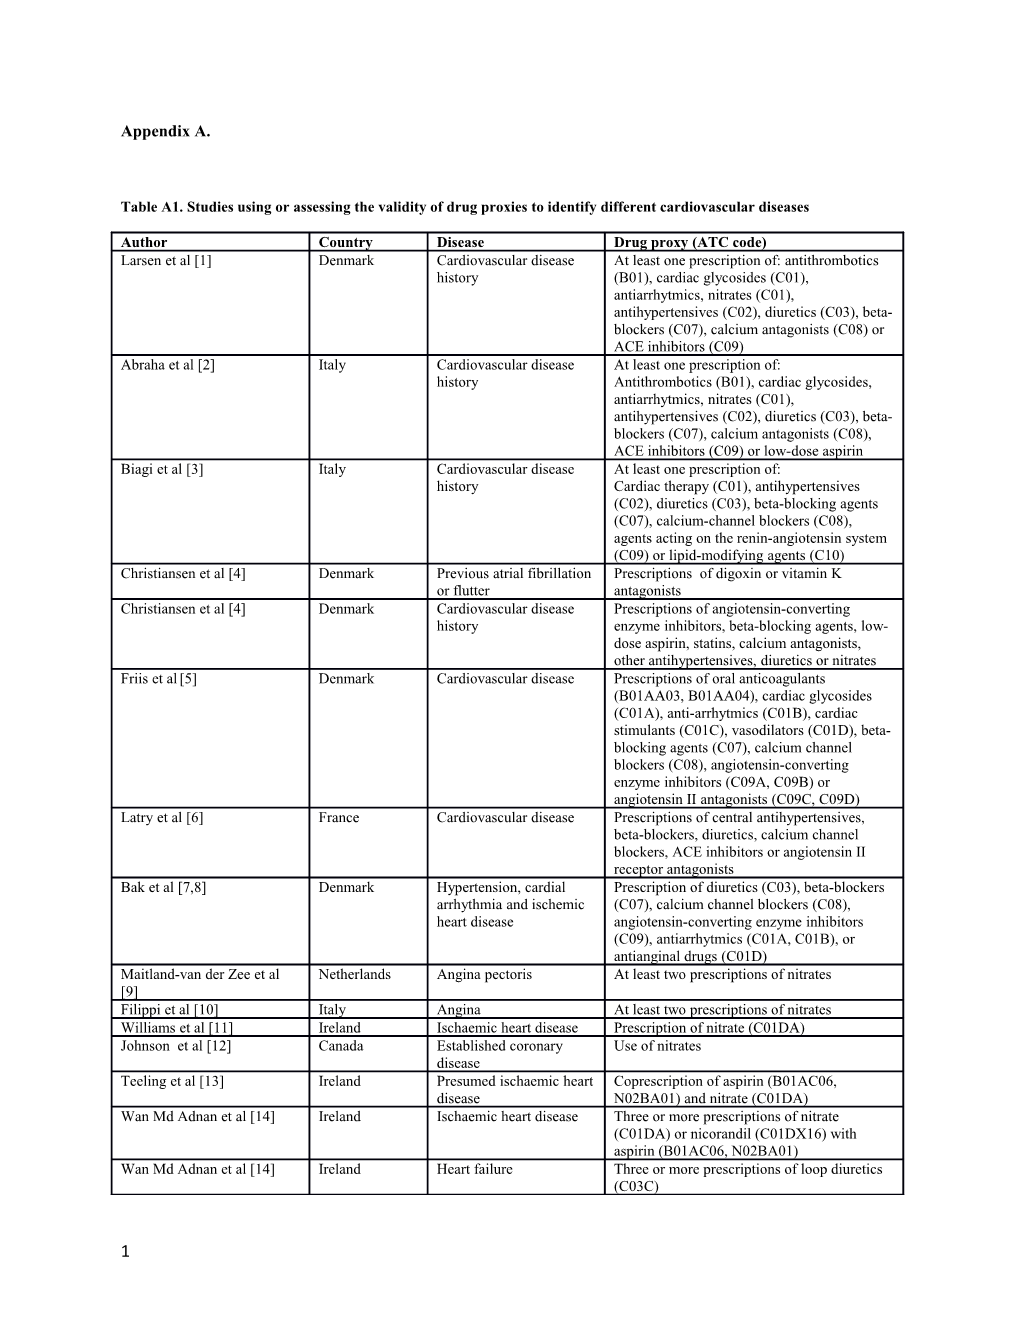 Table A1. Studies Using Or Assessing the Validity of Drug Proxies to Identify Different